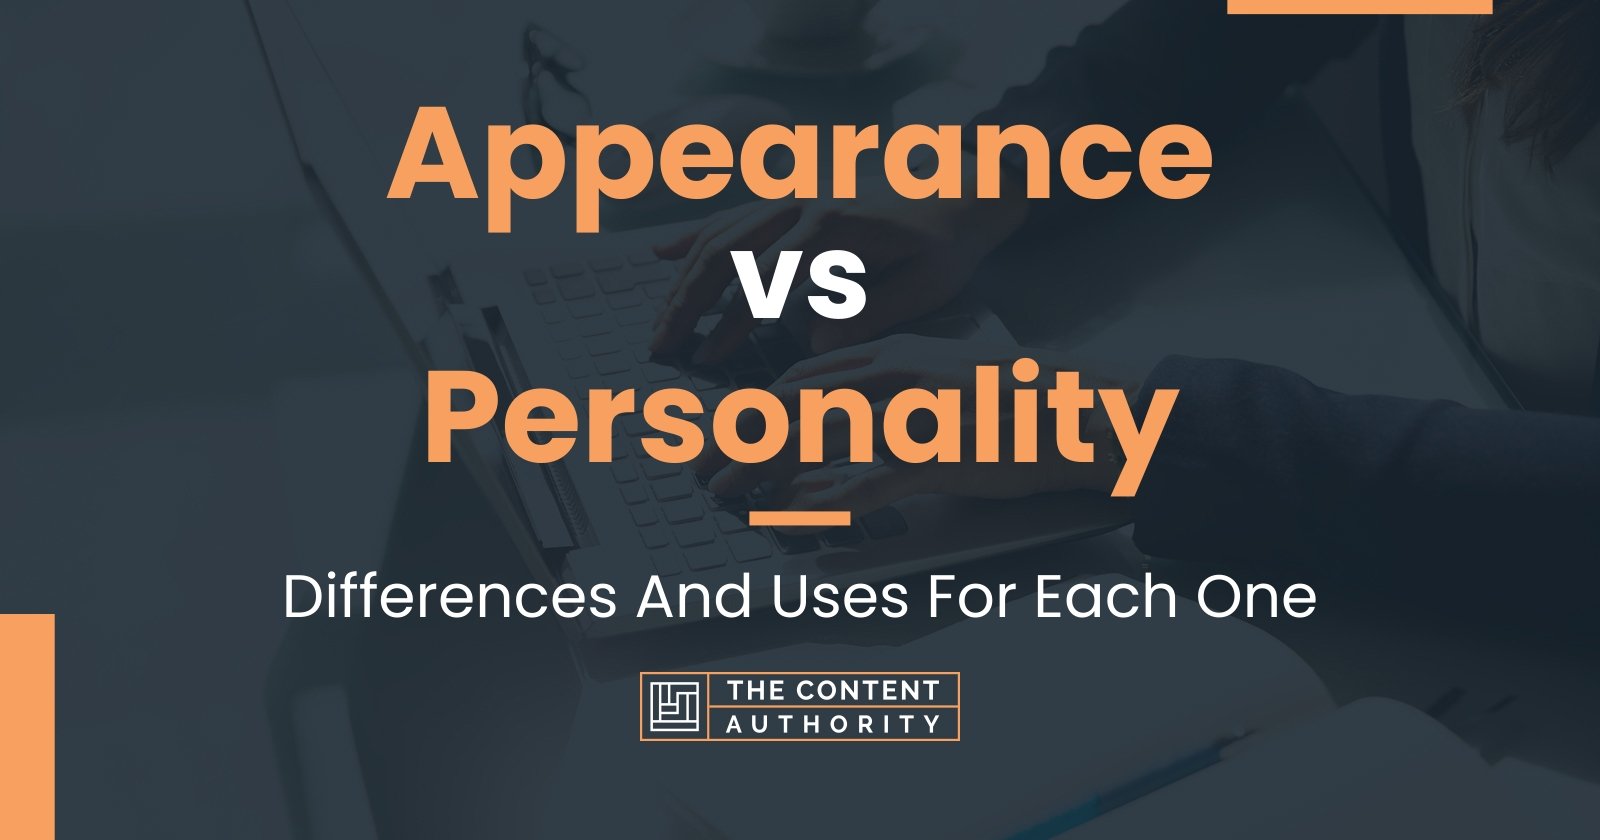 Appearance vs Personality: Differences And Uses For Each One